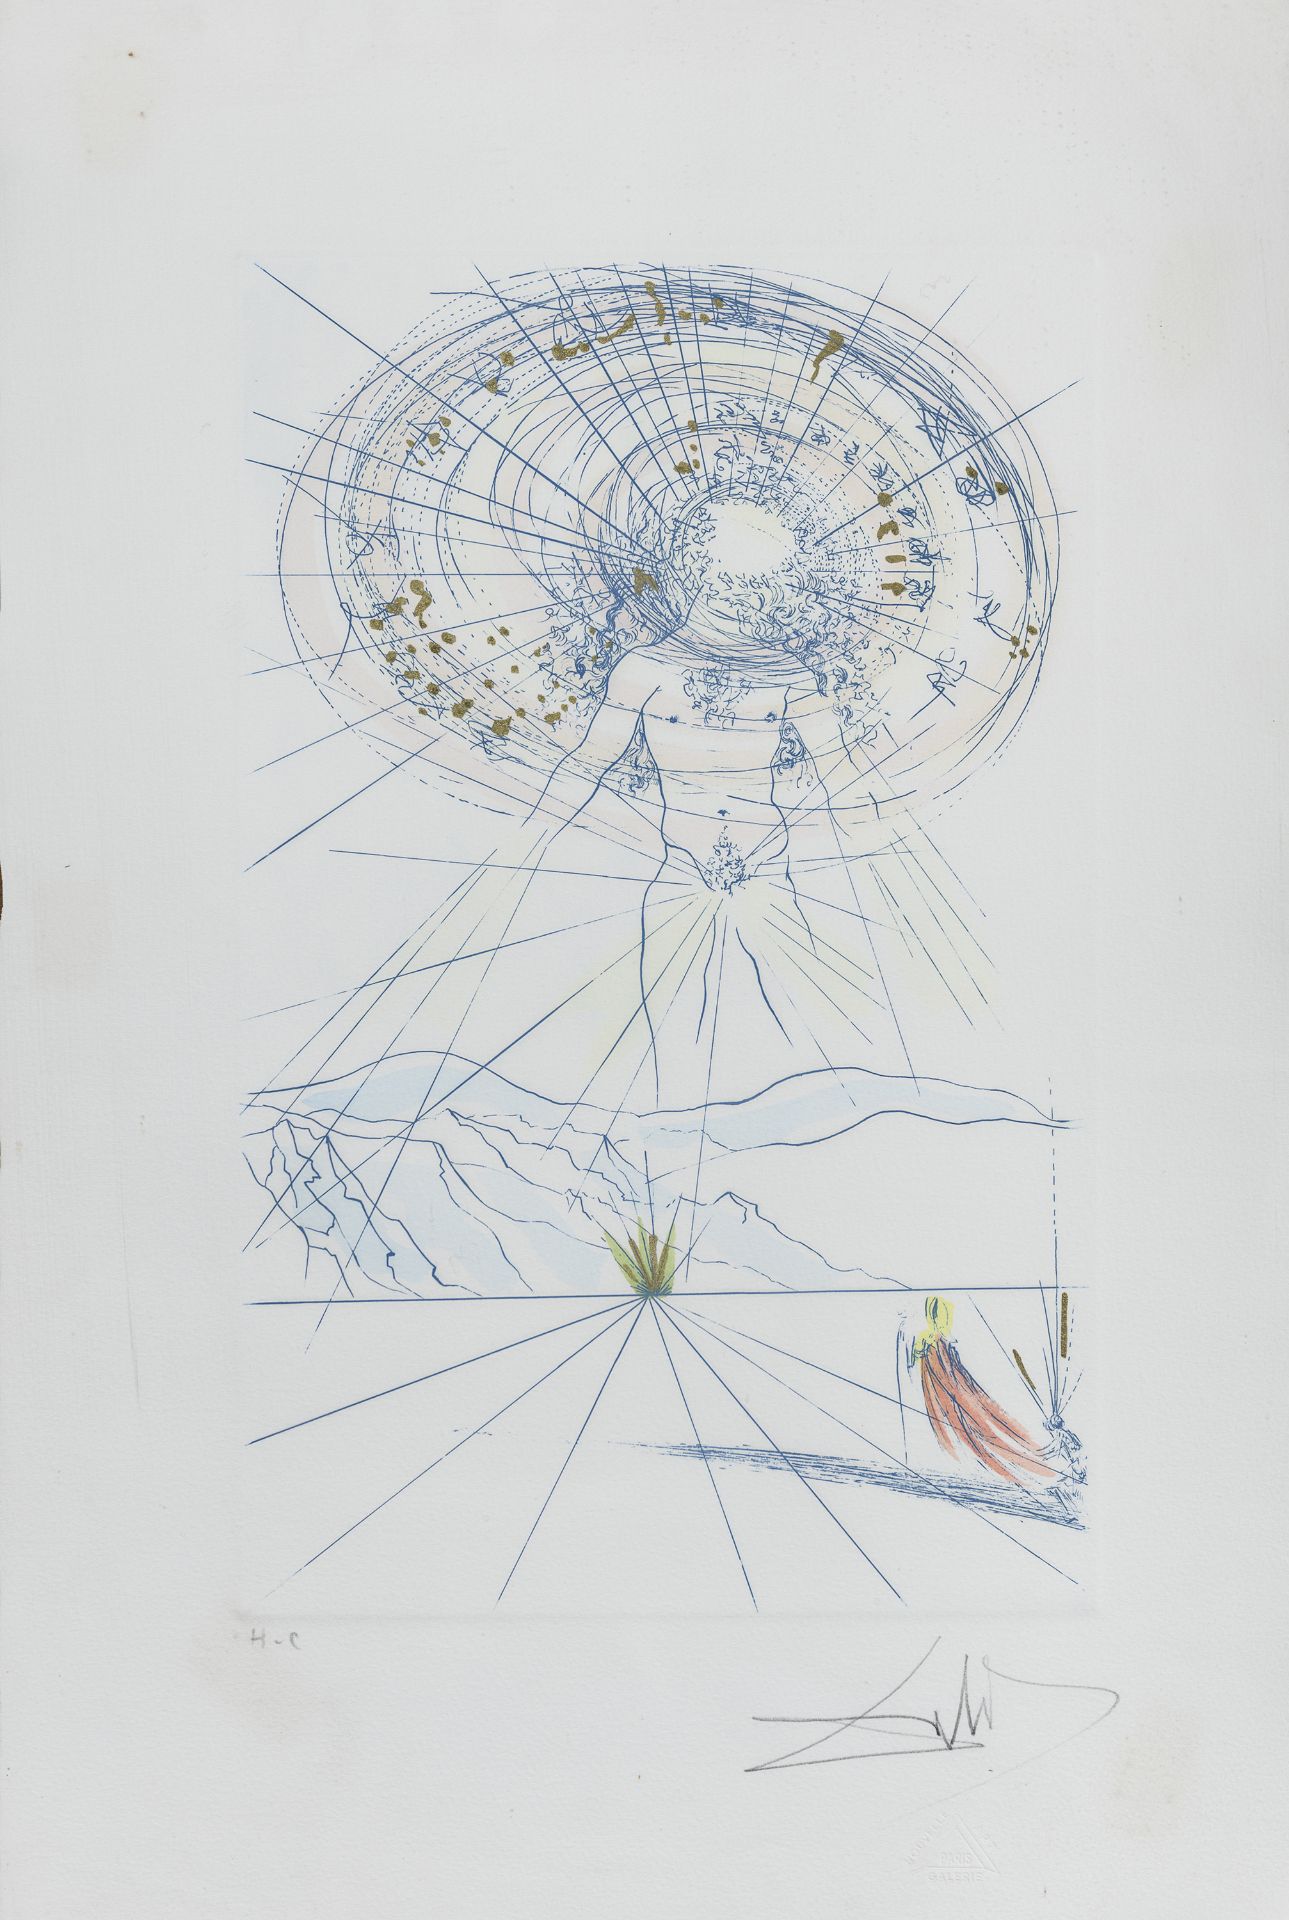 ETCHING BY SALVADOR DALÍ 1971